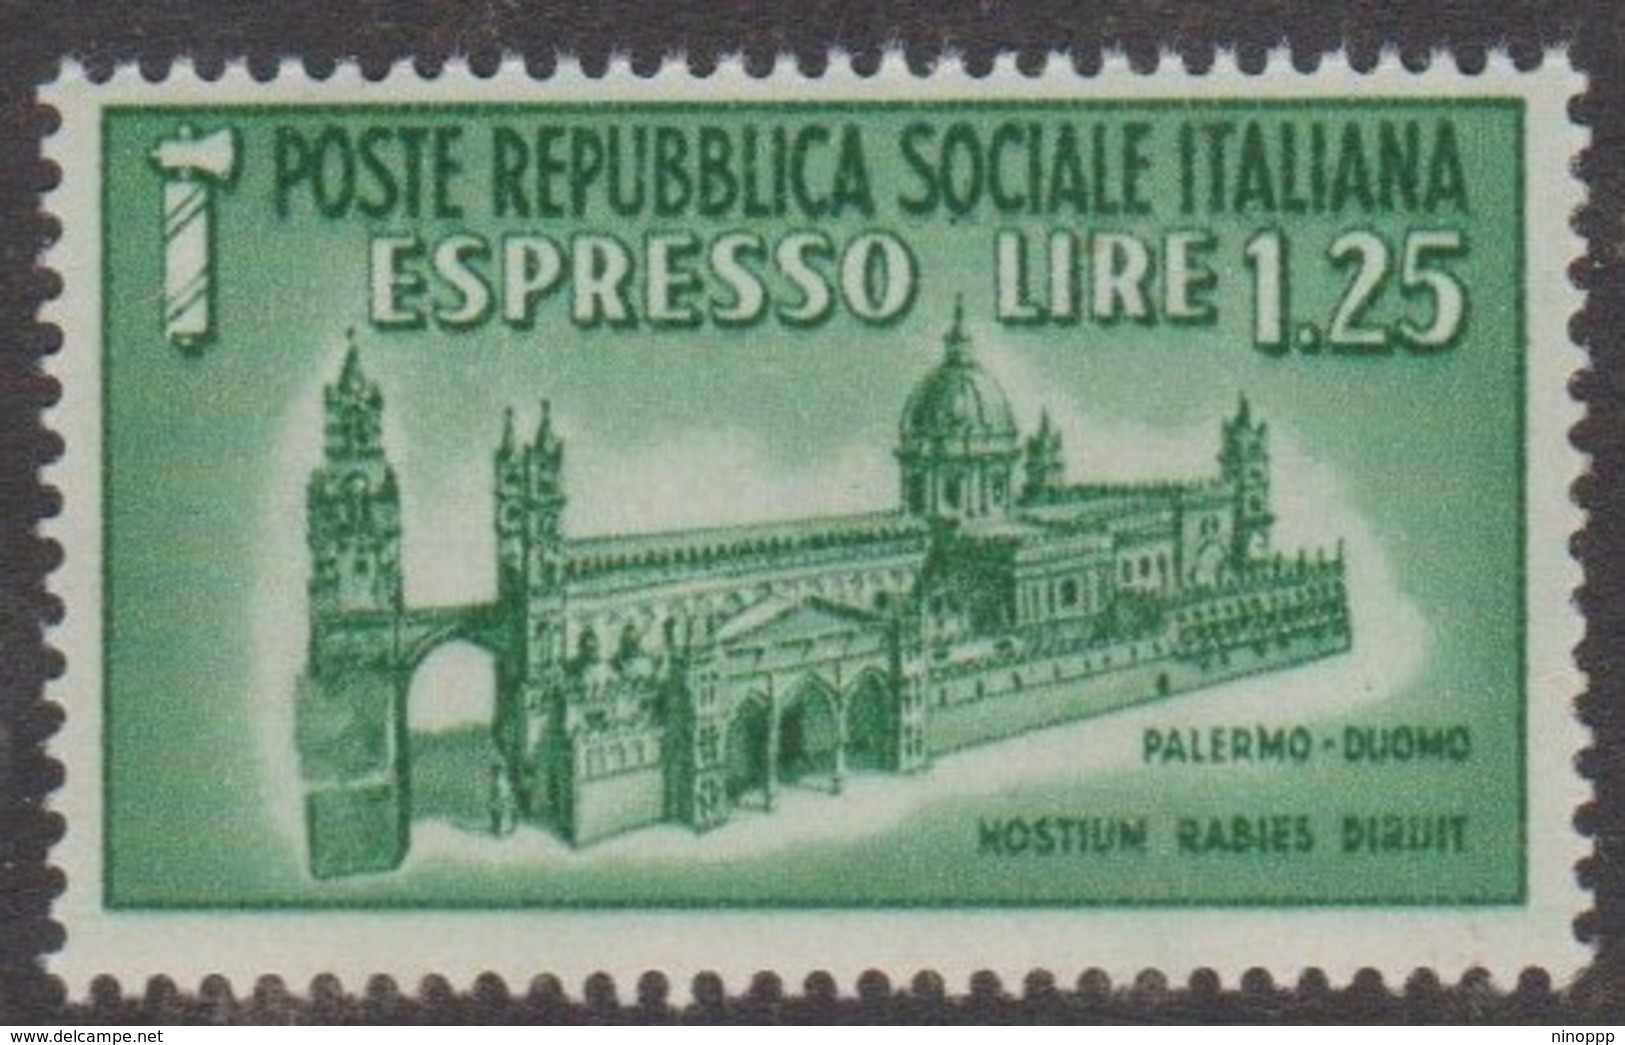 Italy Repubblica Sociale Italiana E 10 1944 Special Delivery Lire 1.25 Green Palerme Dome, Mint Never Hinged, - Express Mail